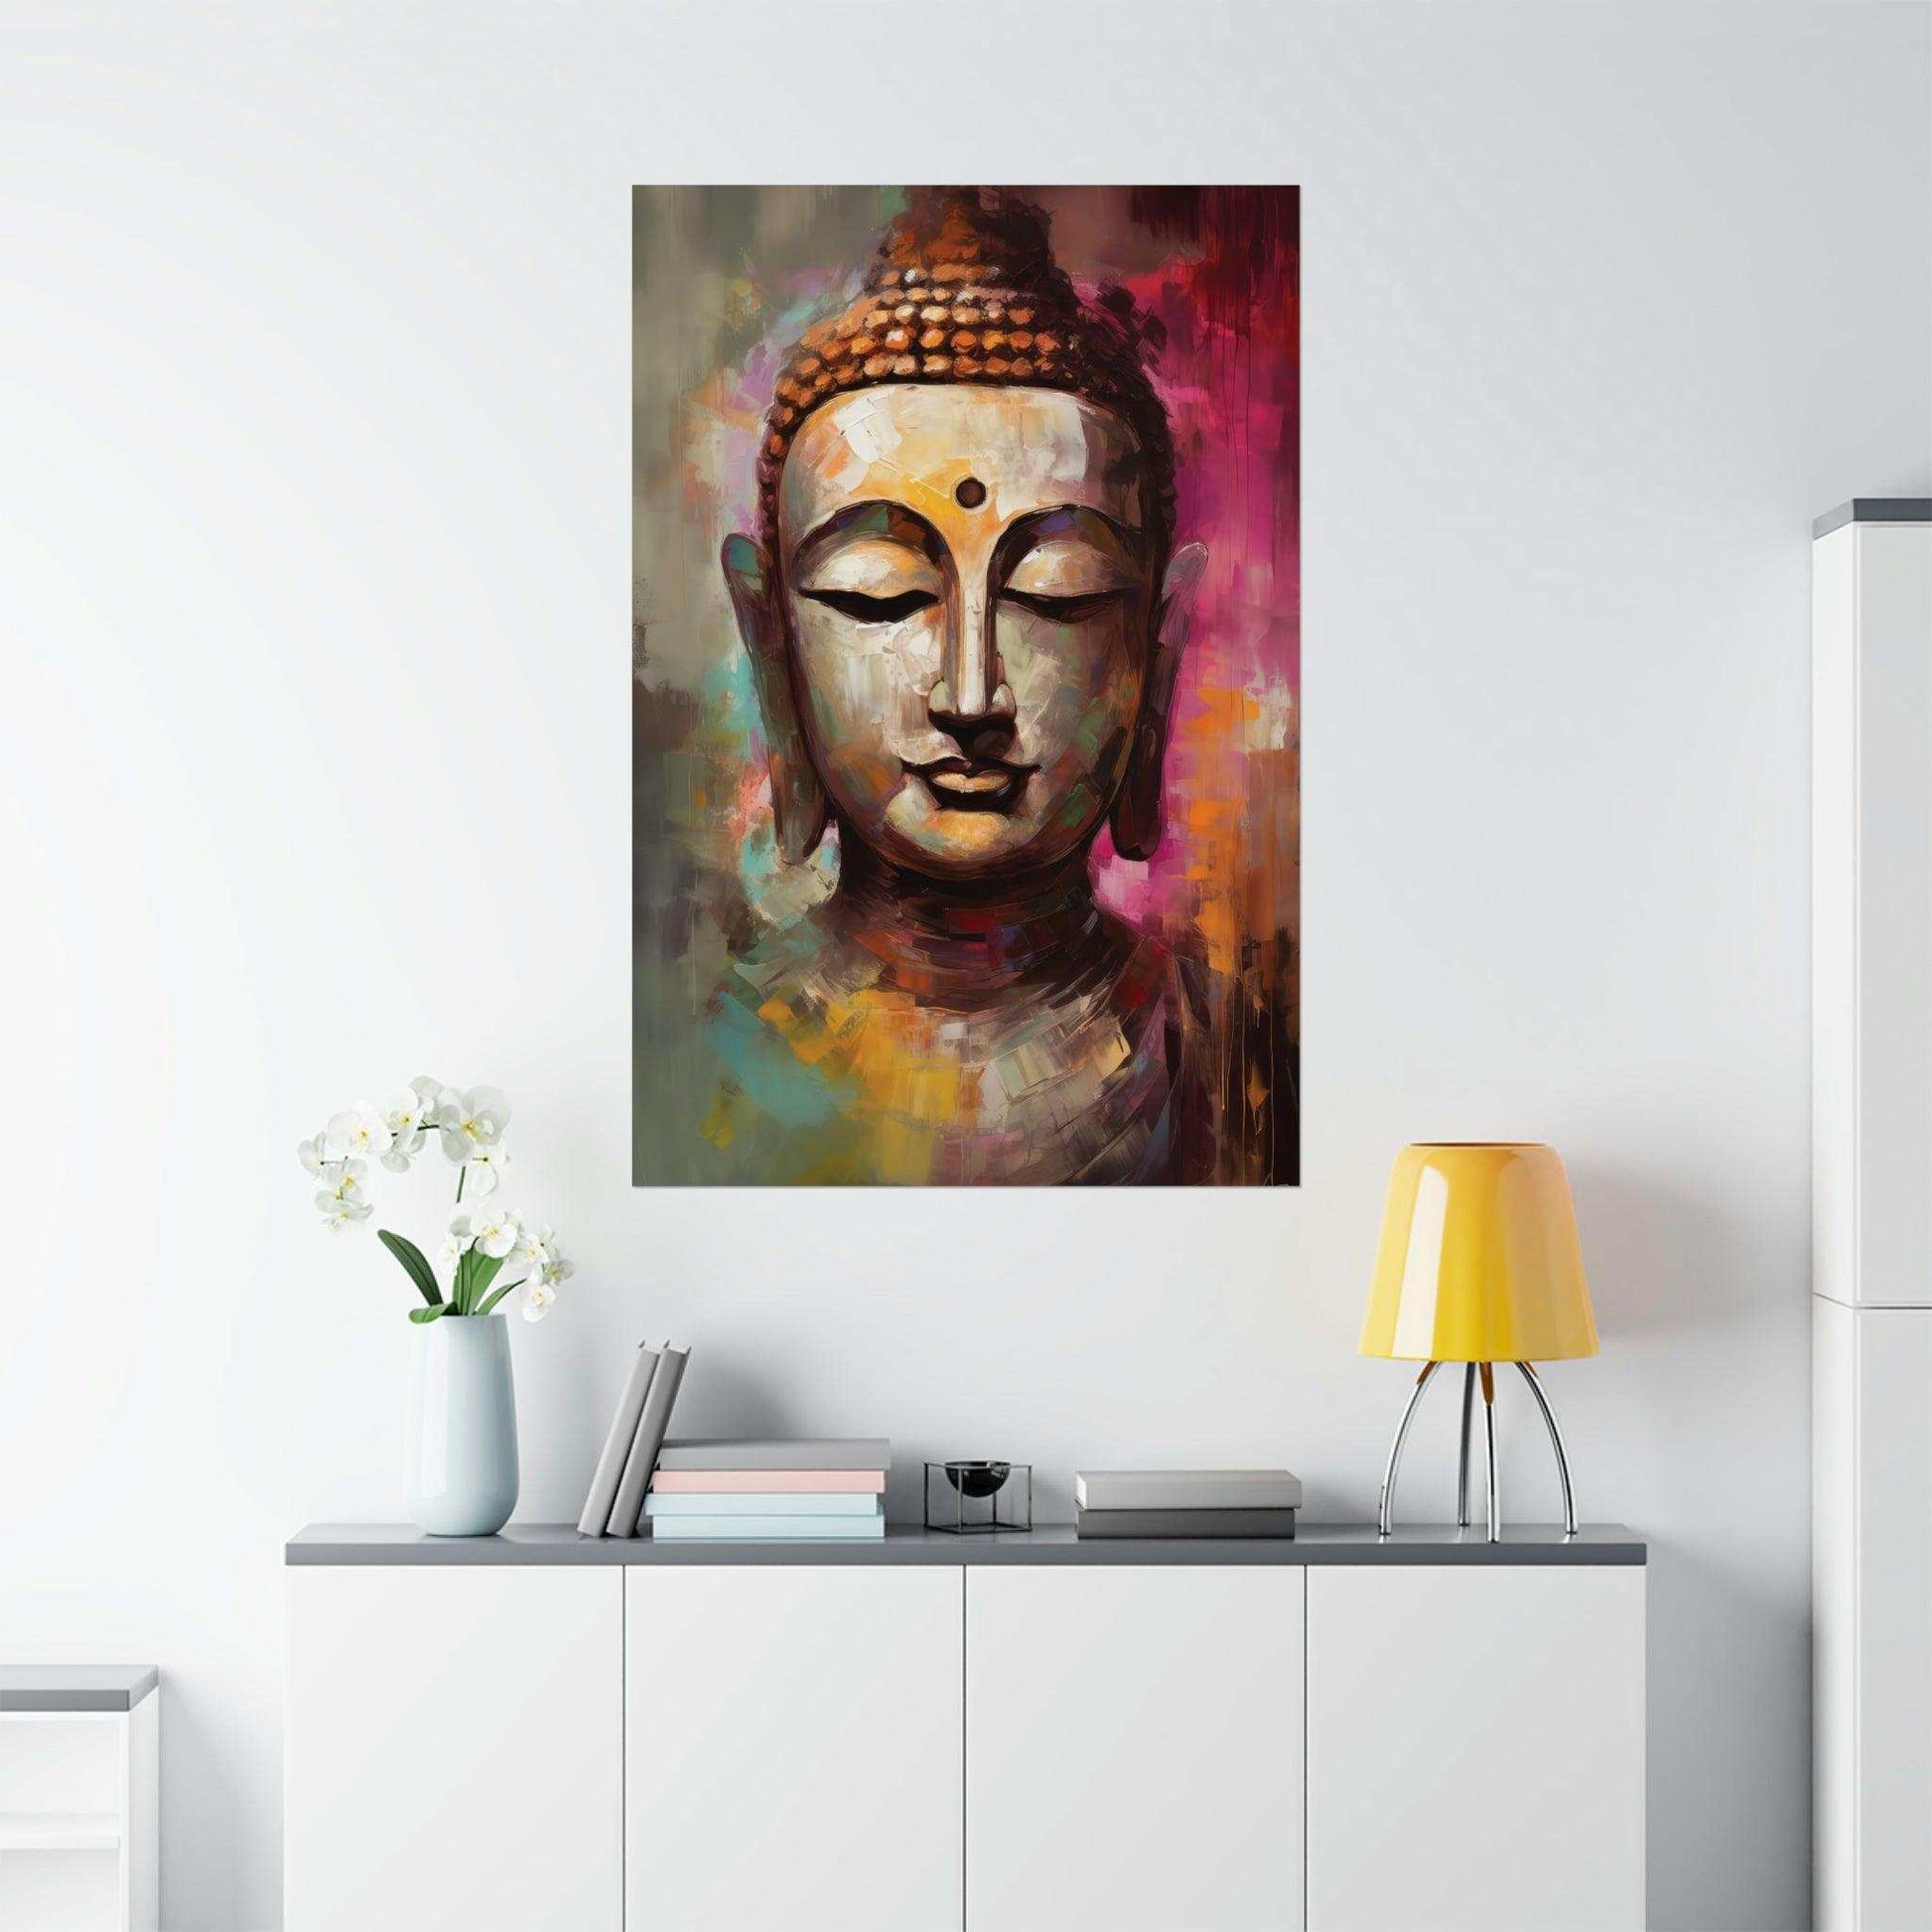 ZenArtBliss.com's Abstract Modern Buddha poster, a vibrant abstract meditation art with a fusion of colors on a matte finish paper.